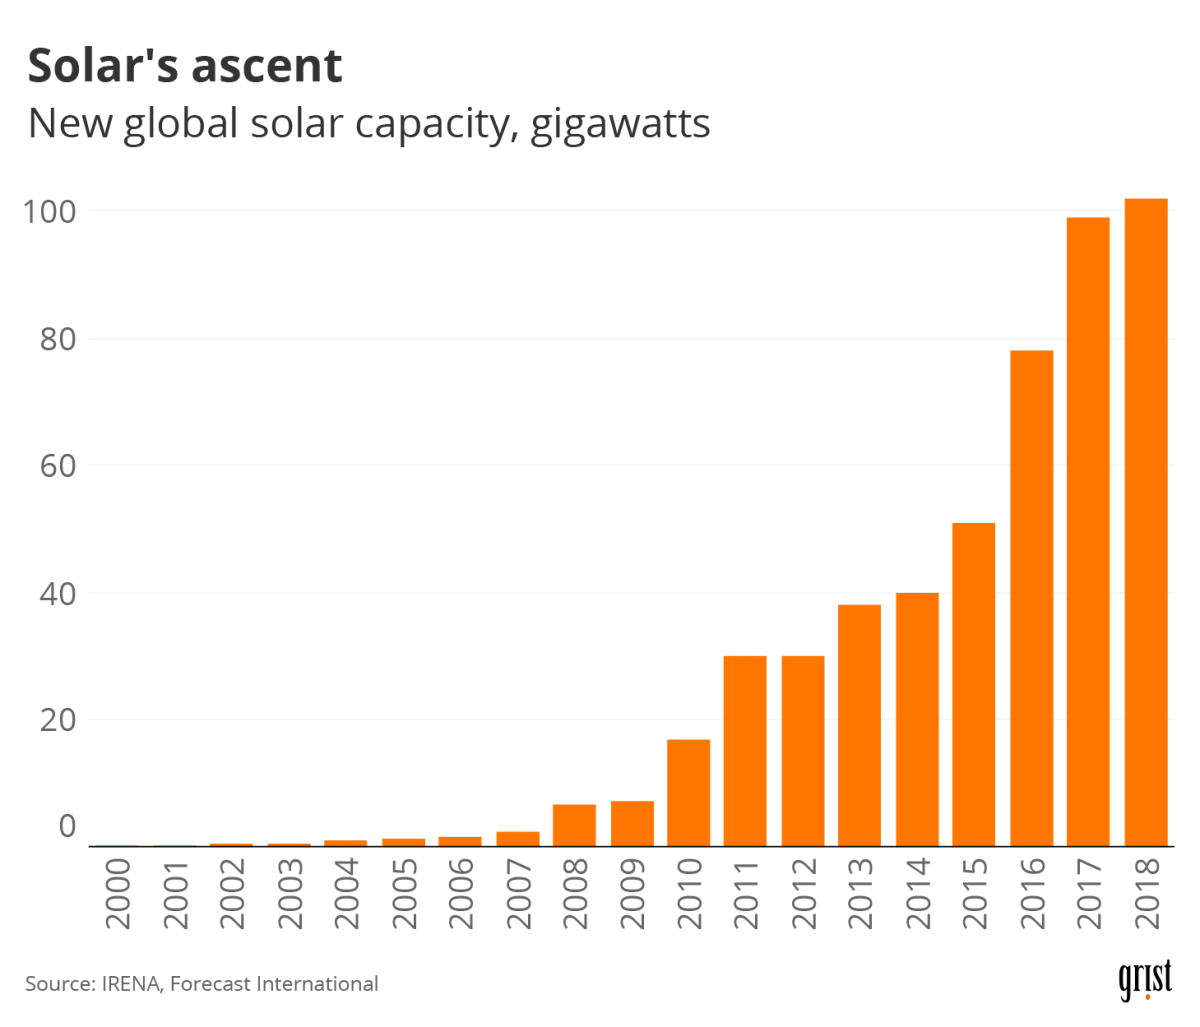 A bar chart show new global solar capacity since 2000. The added capacity has increased every year.